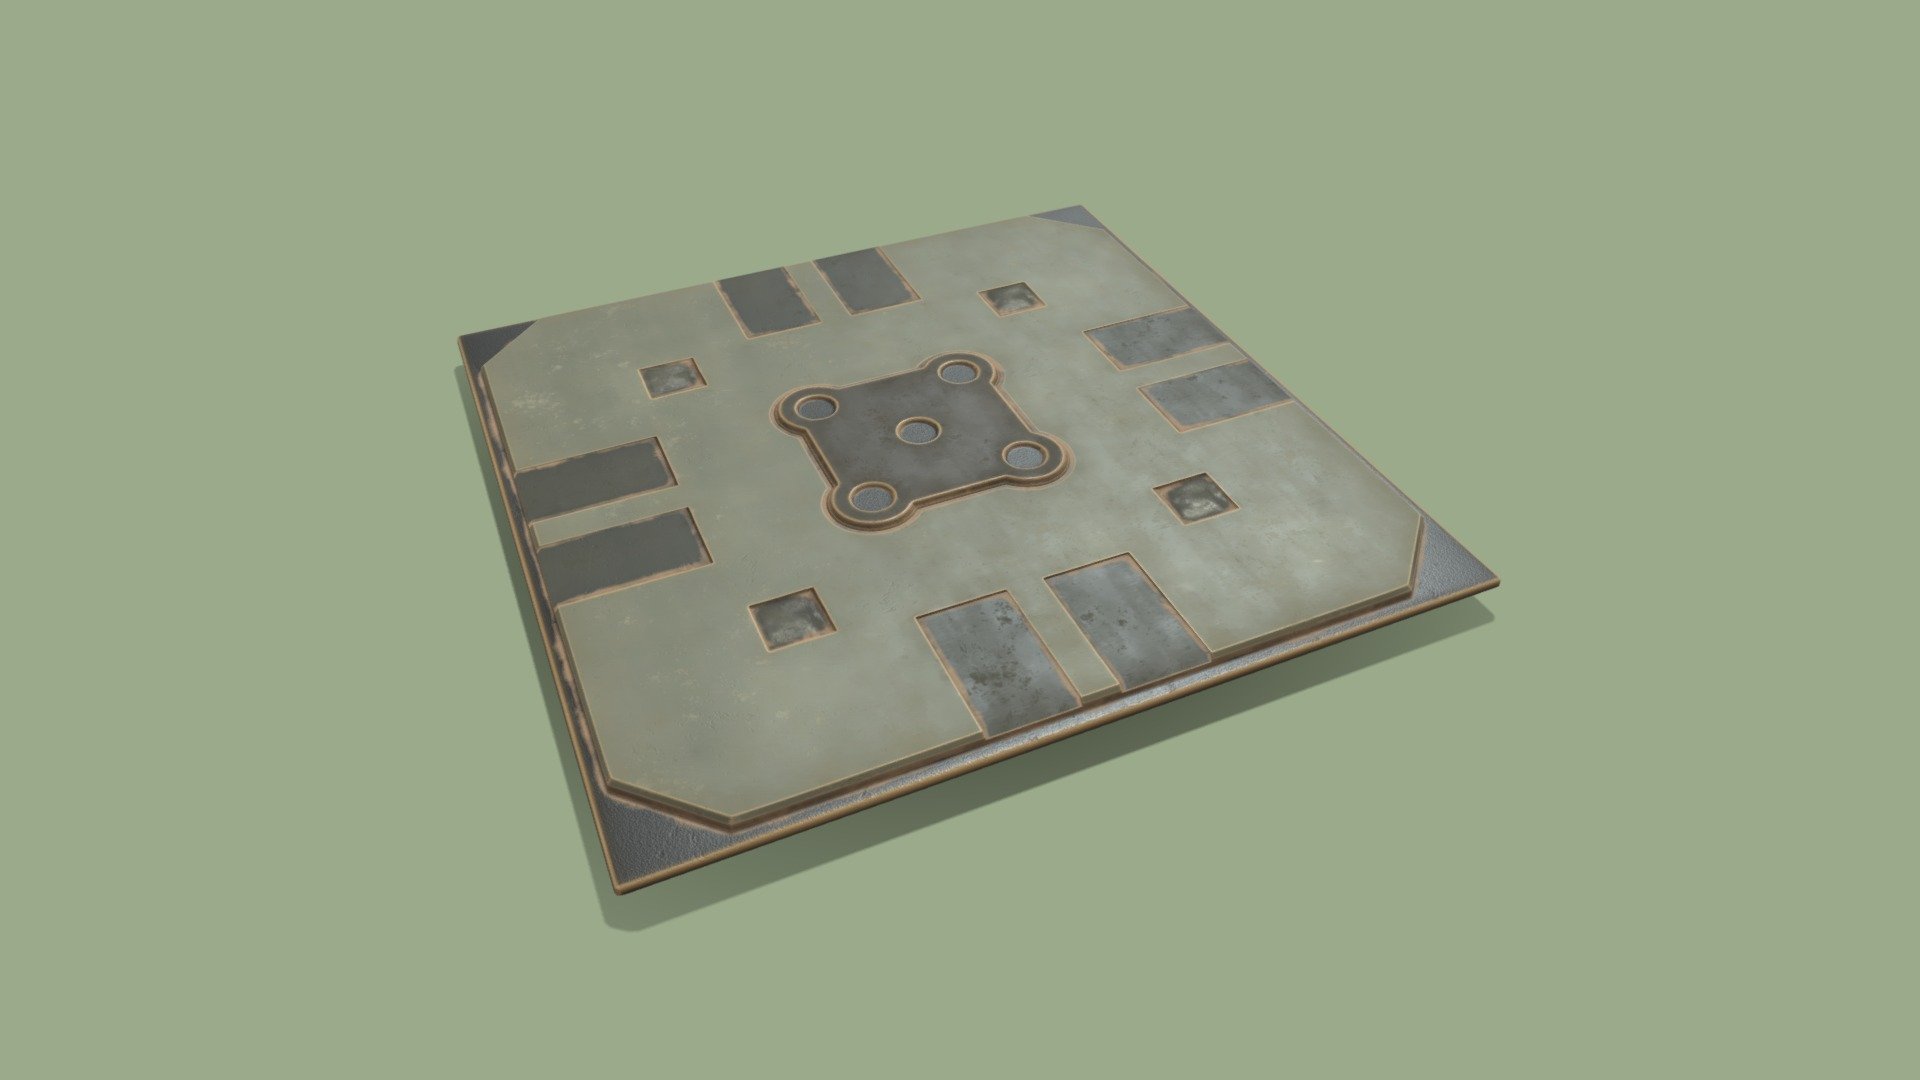 This is an MMLX environment asset designed to work within the dungeon ruins of the Mega Man Legends universe. As seen in the game, this is a floor panel that represents a fork in a tunnel typically placed between multiple routes.

The asset provided here is the high res game asset. That includes the textures. Feel free to download and use for your projects. Please credit PSYCHOPOMP and/or JJ Chalupnik for the modeling/texturing if you decide to use it.

Learn more about the fan project here: https://psychopomp-studios.com/mmlx/ - Floor Junction Panel - Download Free 3D model by TUGBOAT GAMES (@TugboatGames) 3d model